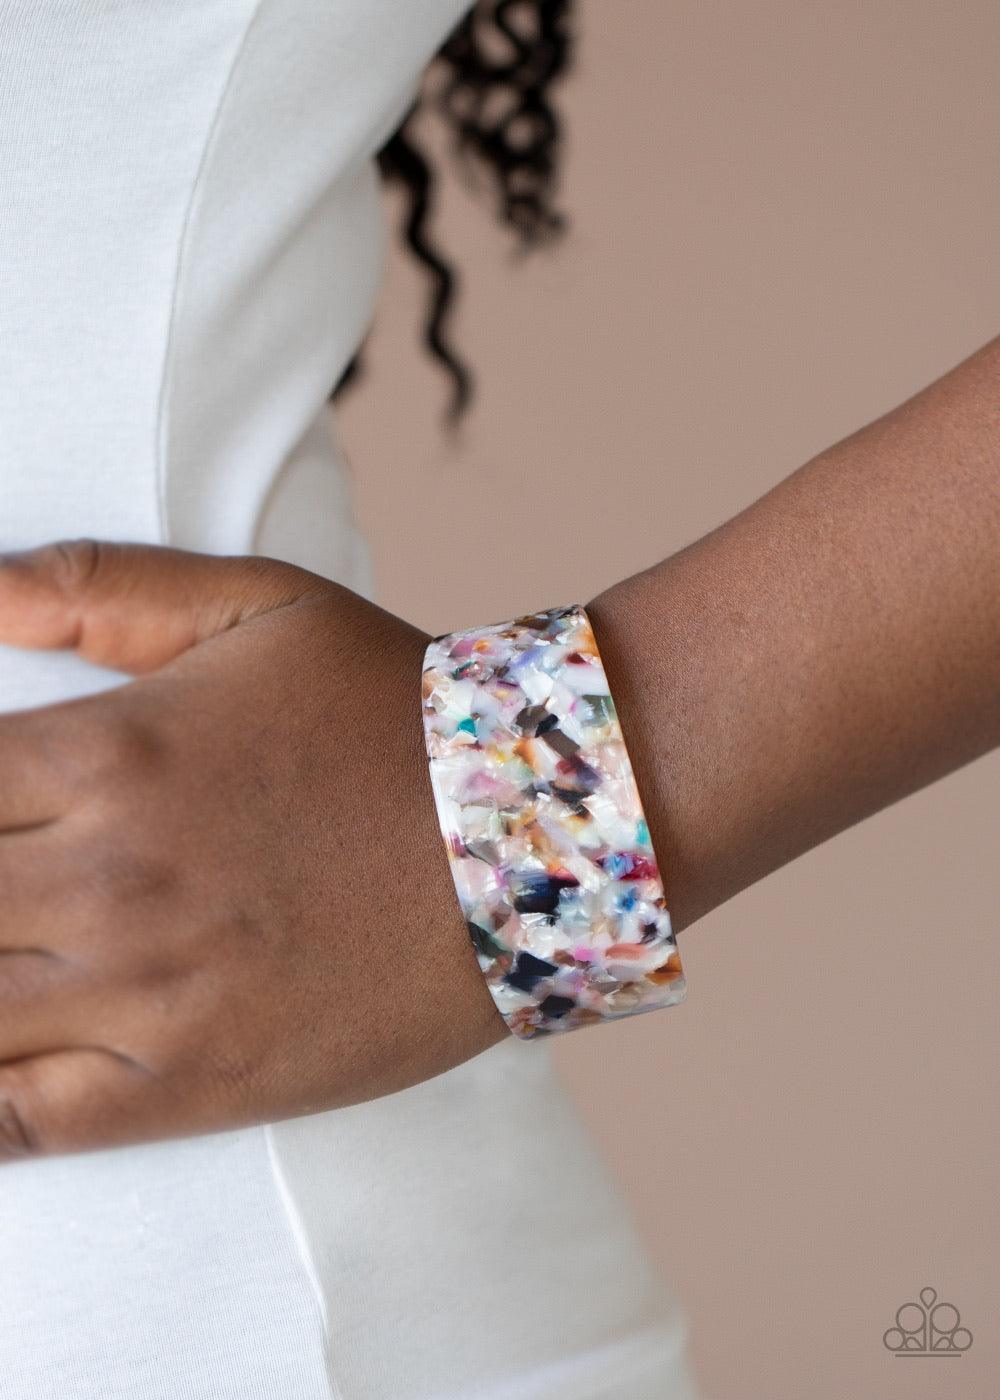 Paparazzi Accessories HAUTE Under The Collar - Multi Speckled in a colorful tortoise shell pattern, a multicolored acrylic cuff delicately curls around the wrist for a retro flair. Sold as one individual bracelet. Jewelry